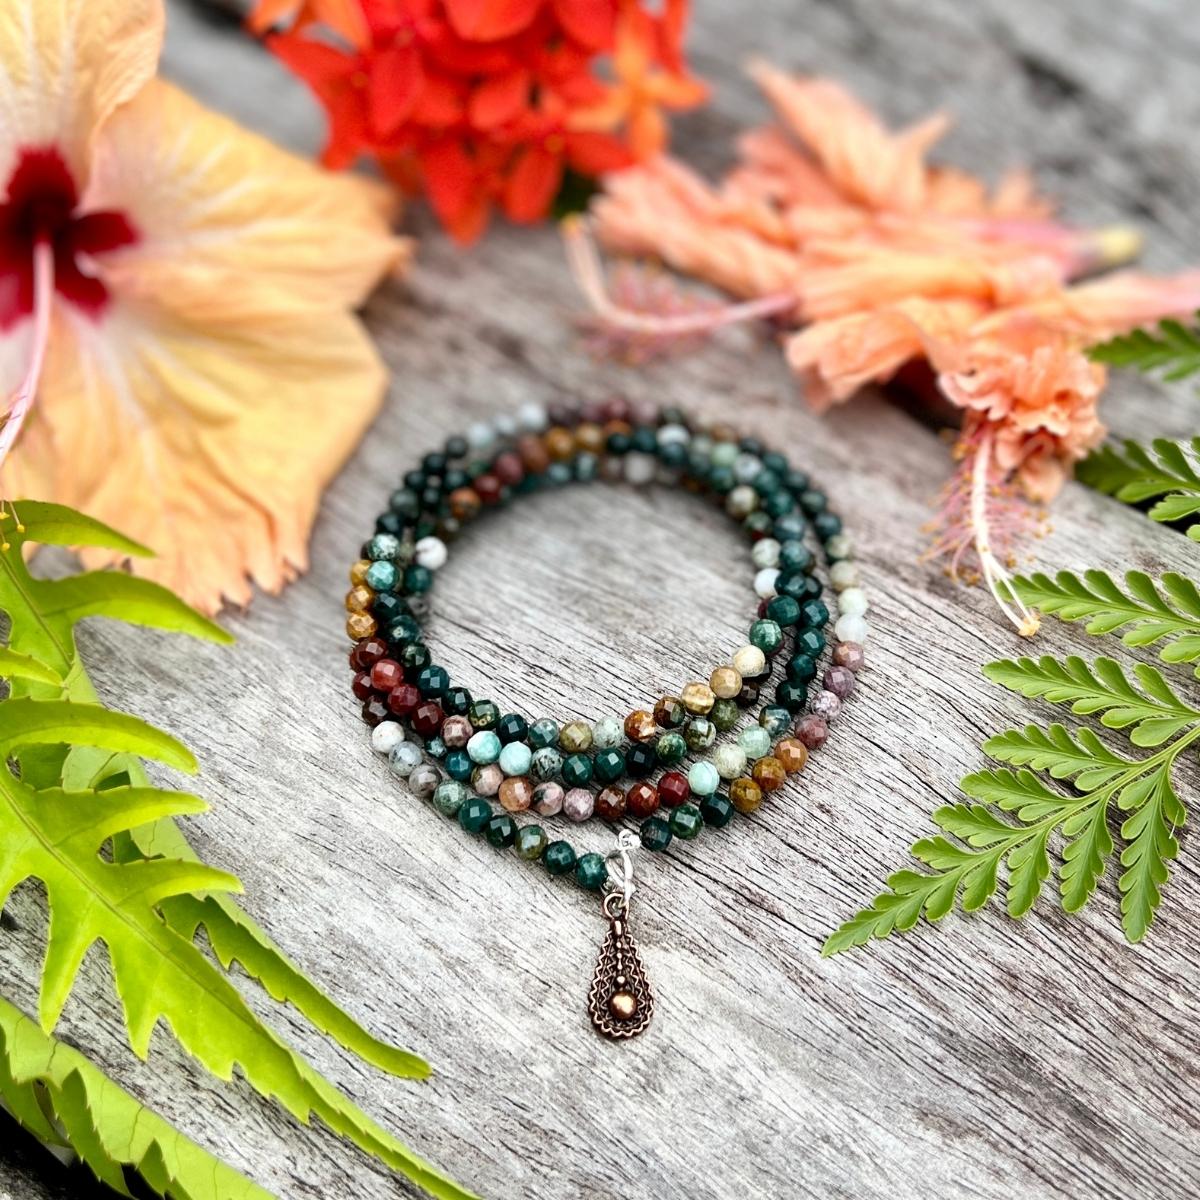 Bloodstone Wrap Bracelet for Courage.  Bloodstone is a stone of courage and wisdom, noble sacrifice, and altruistic character. Bloodstone represents a courageous spirit. Bloodstone boosts the innate healing power inside you by quieting a preoccupied mind and refocusing your energy on repair and renewal.